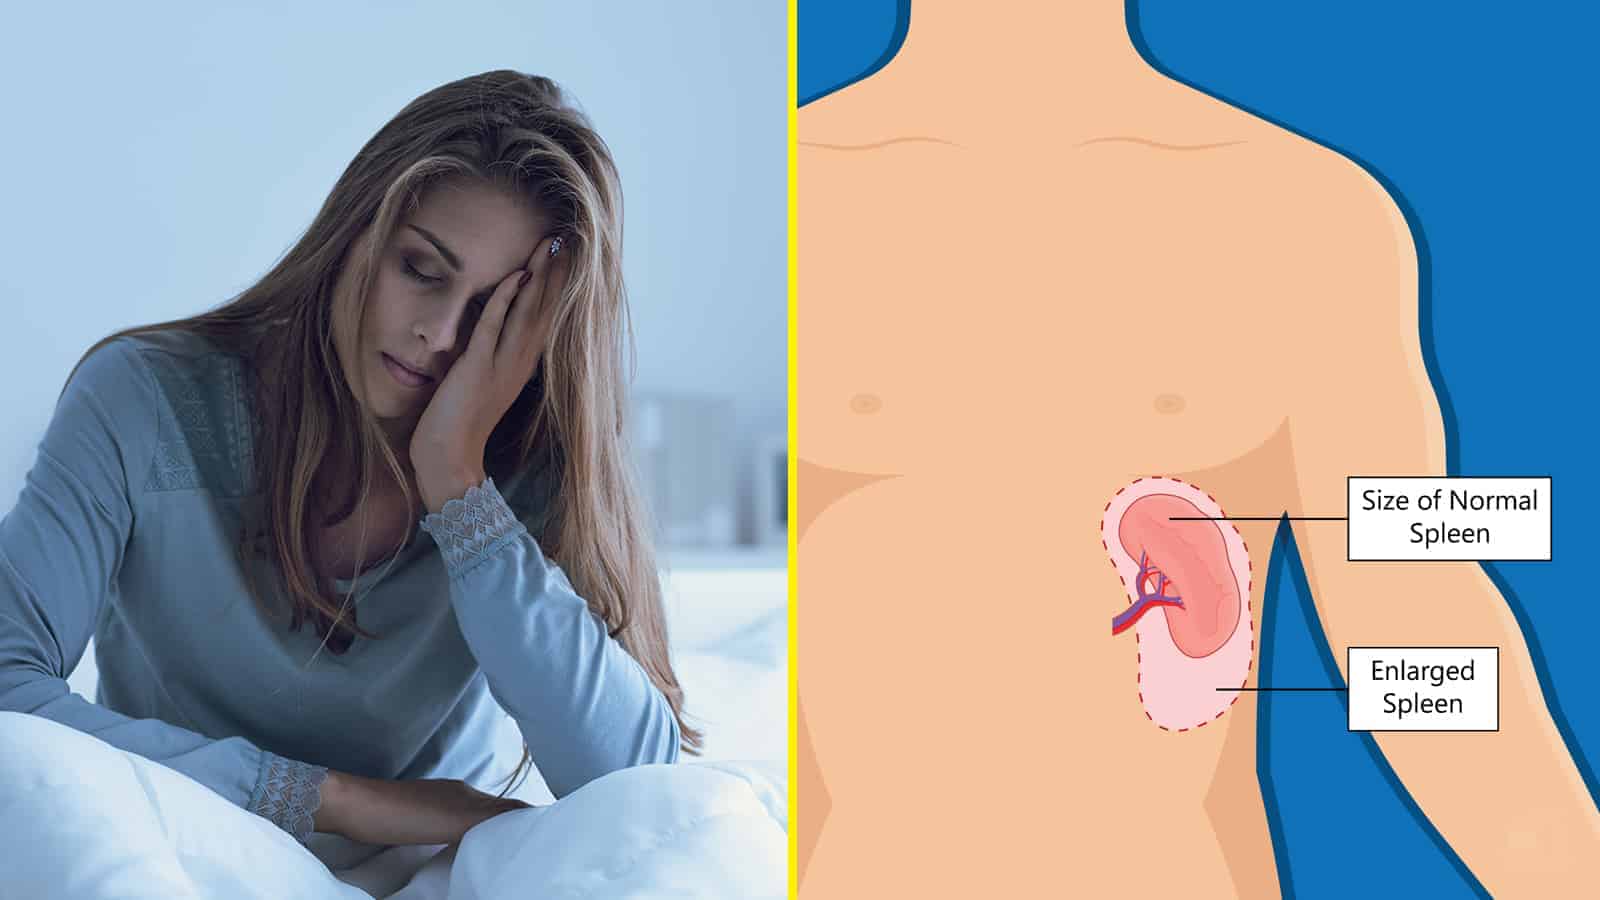 10 Red Flags You Might Have an Enlarged Spleen